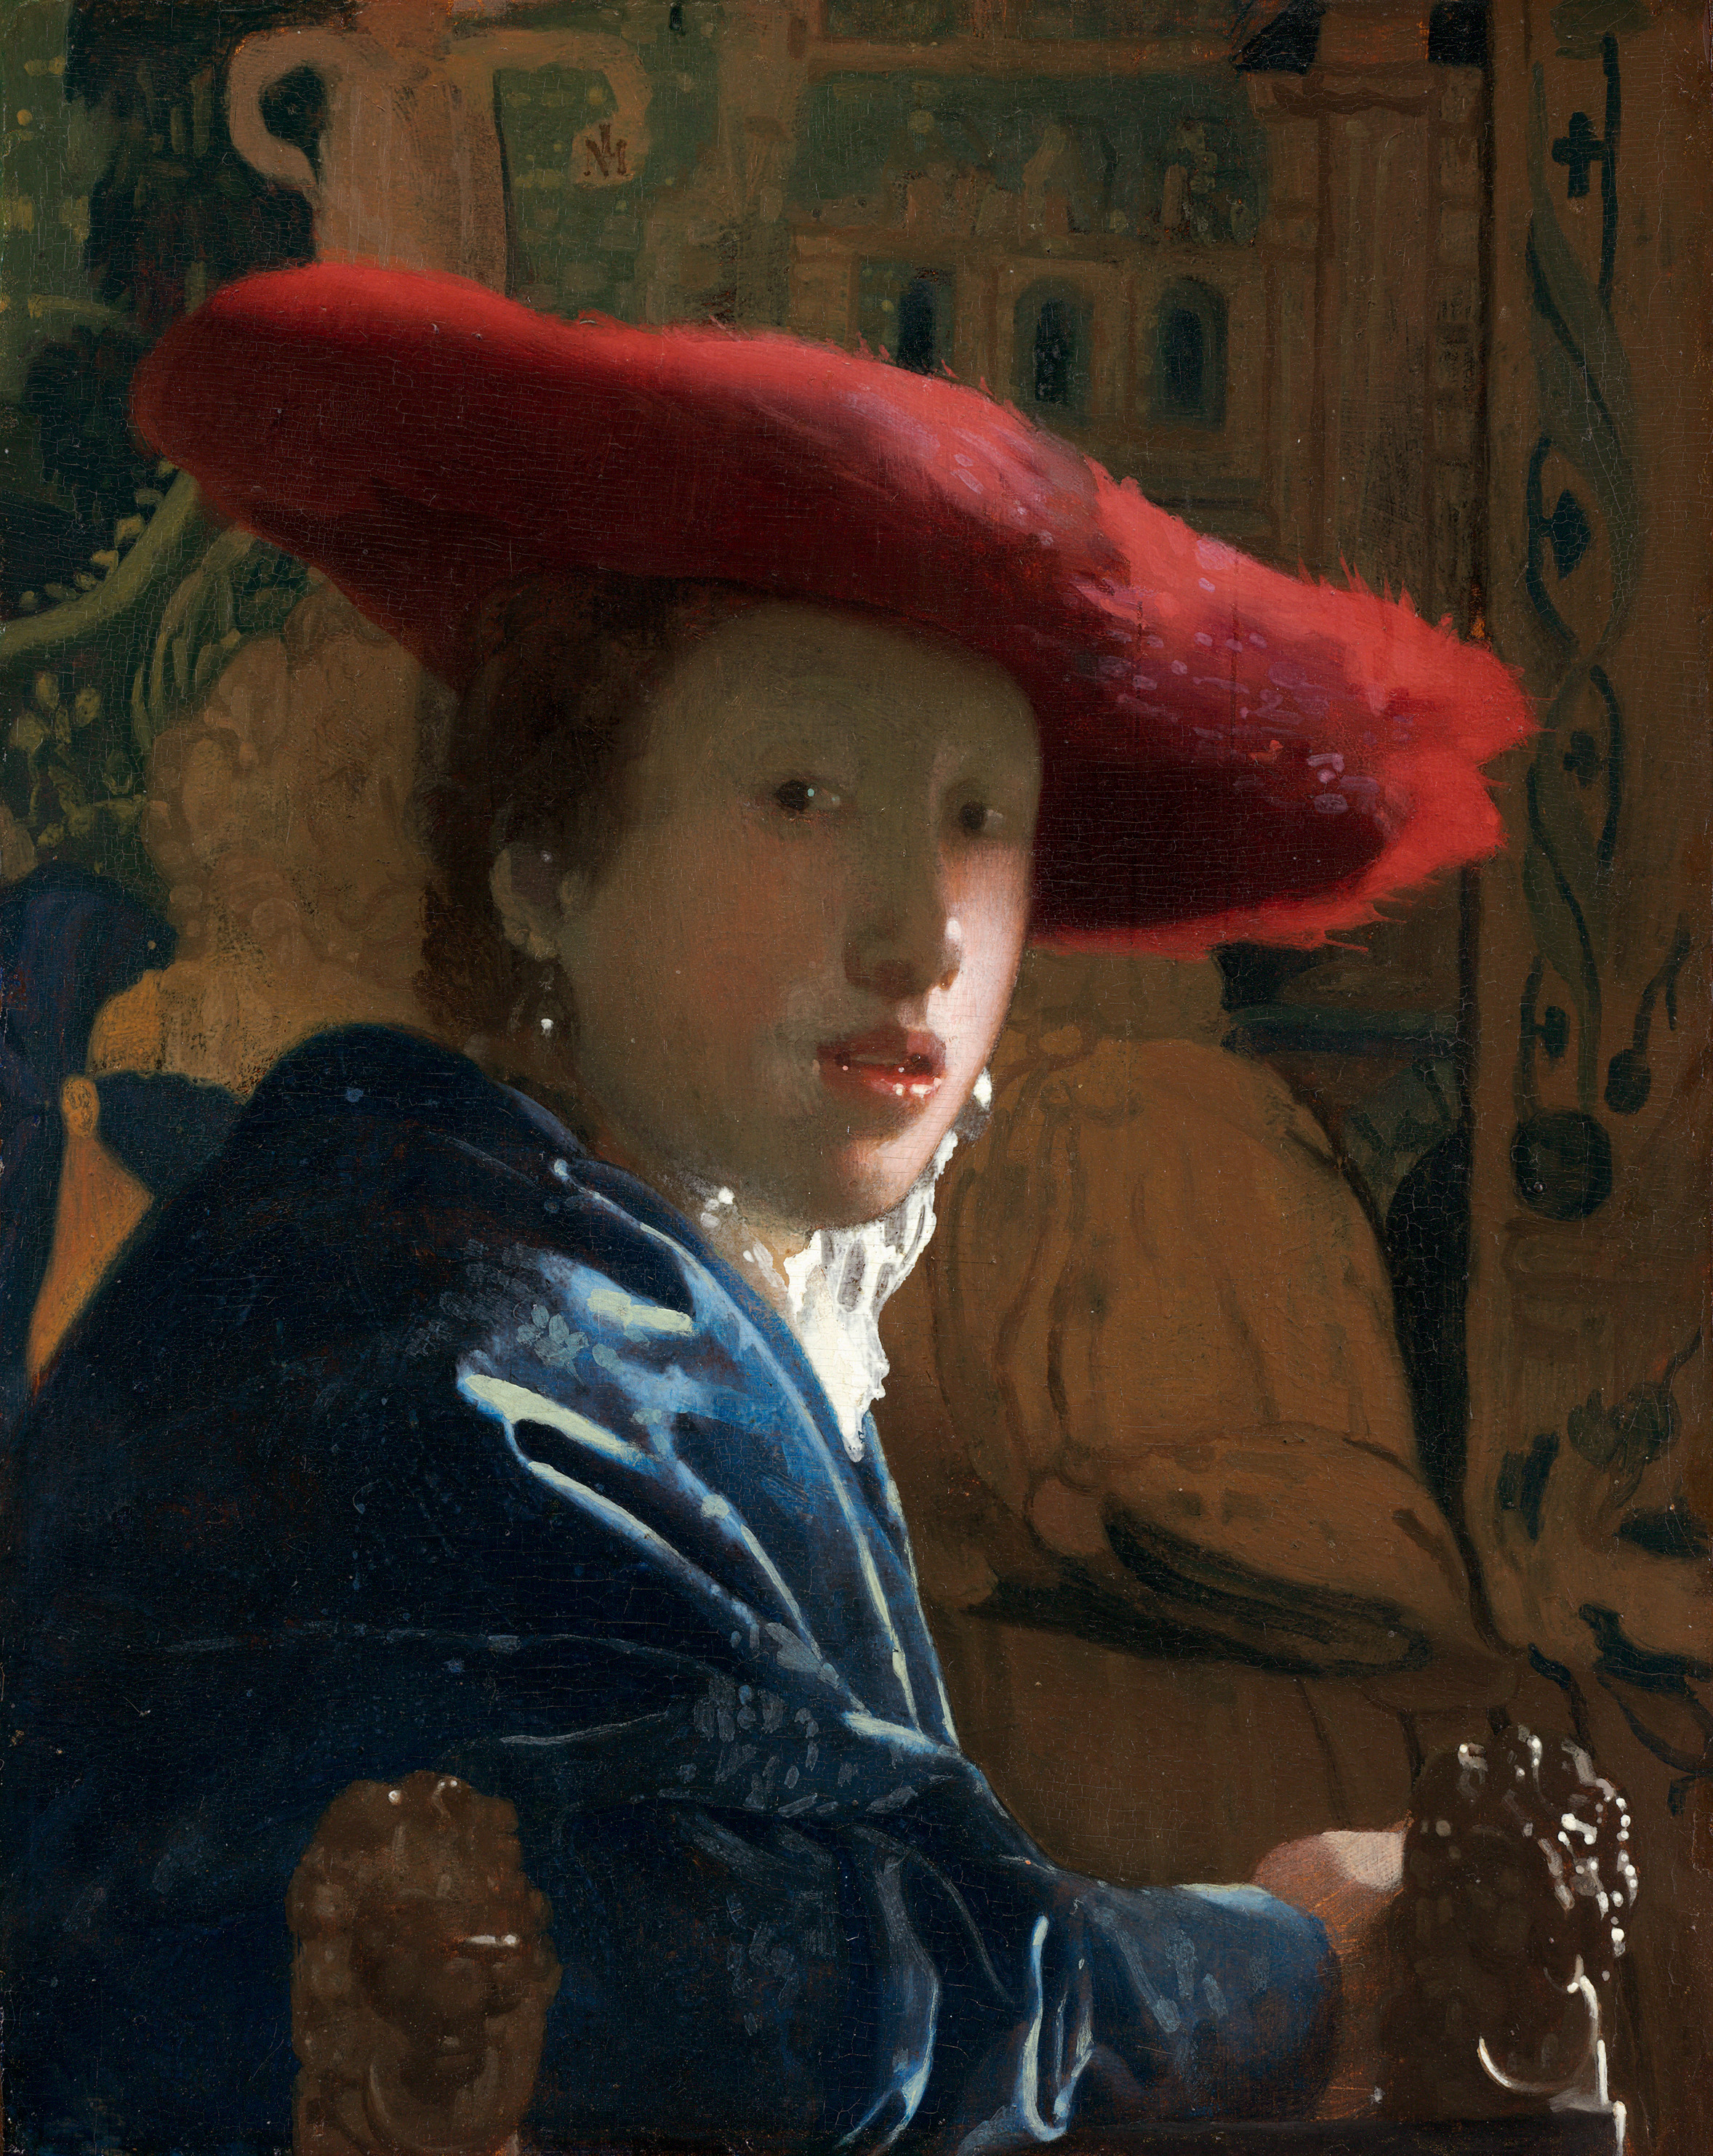 Gilr with a red hat by Joannes Vermeer